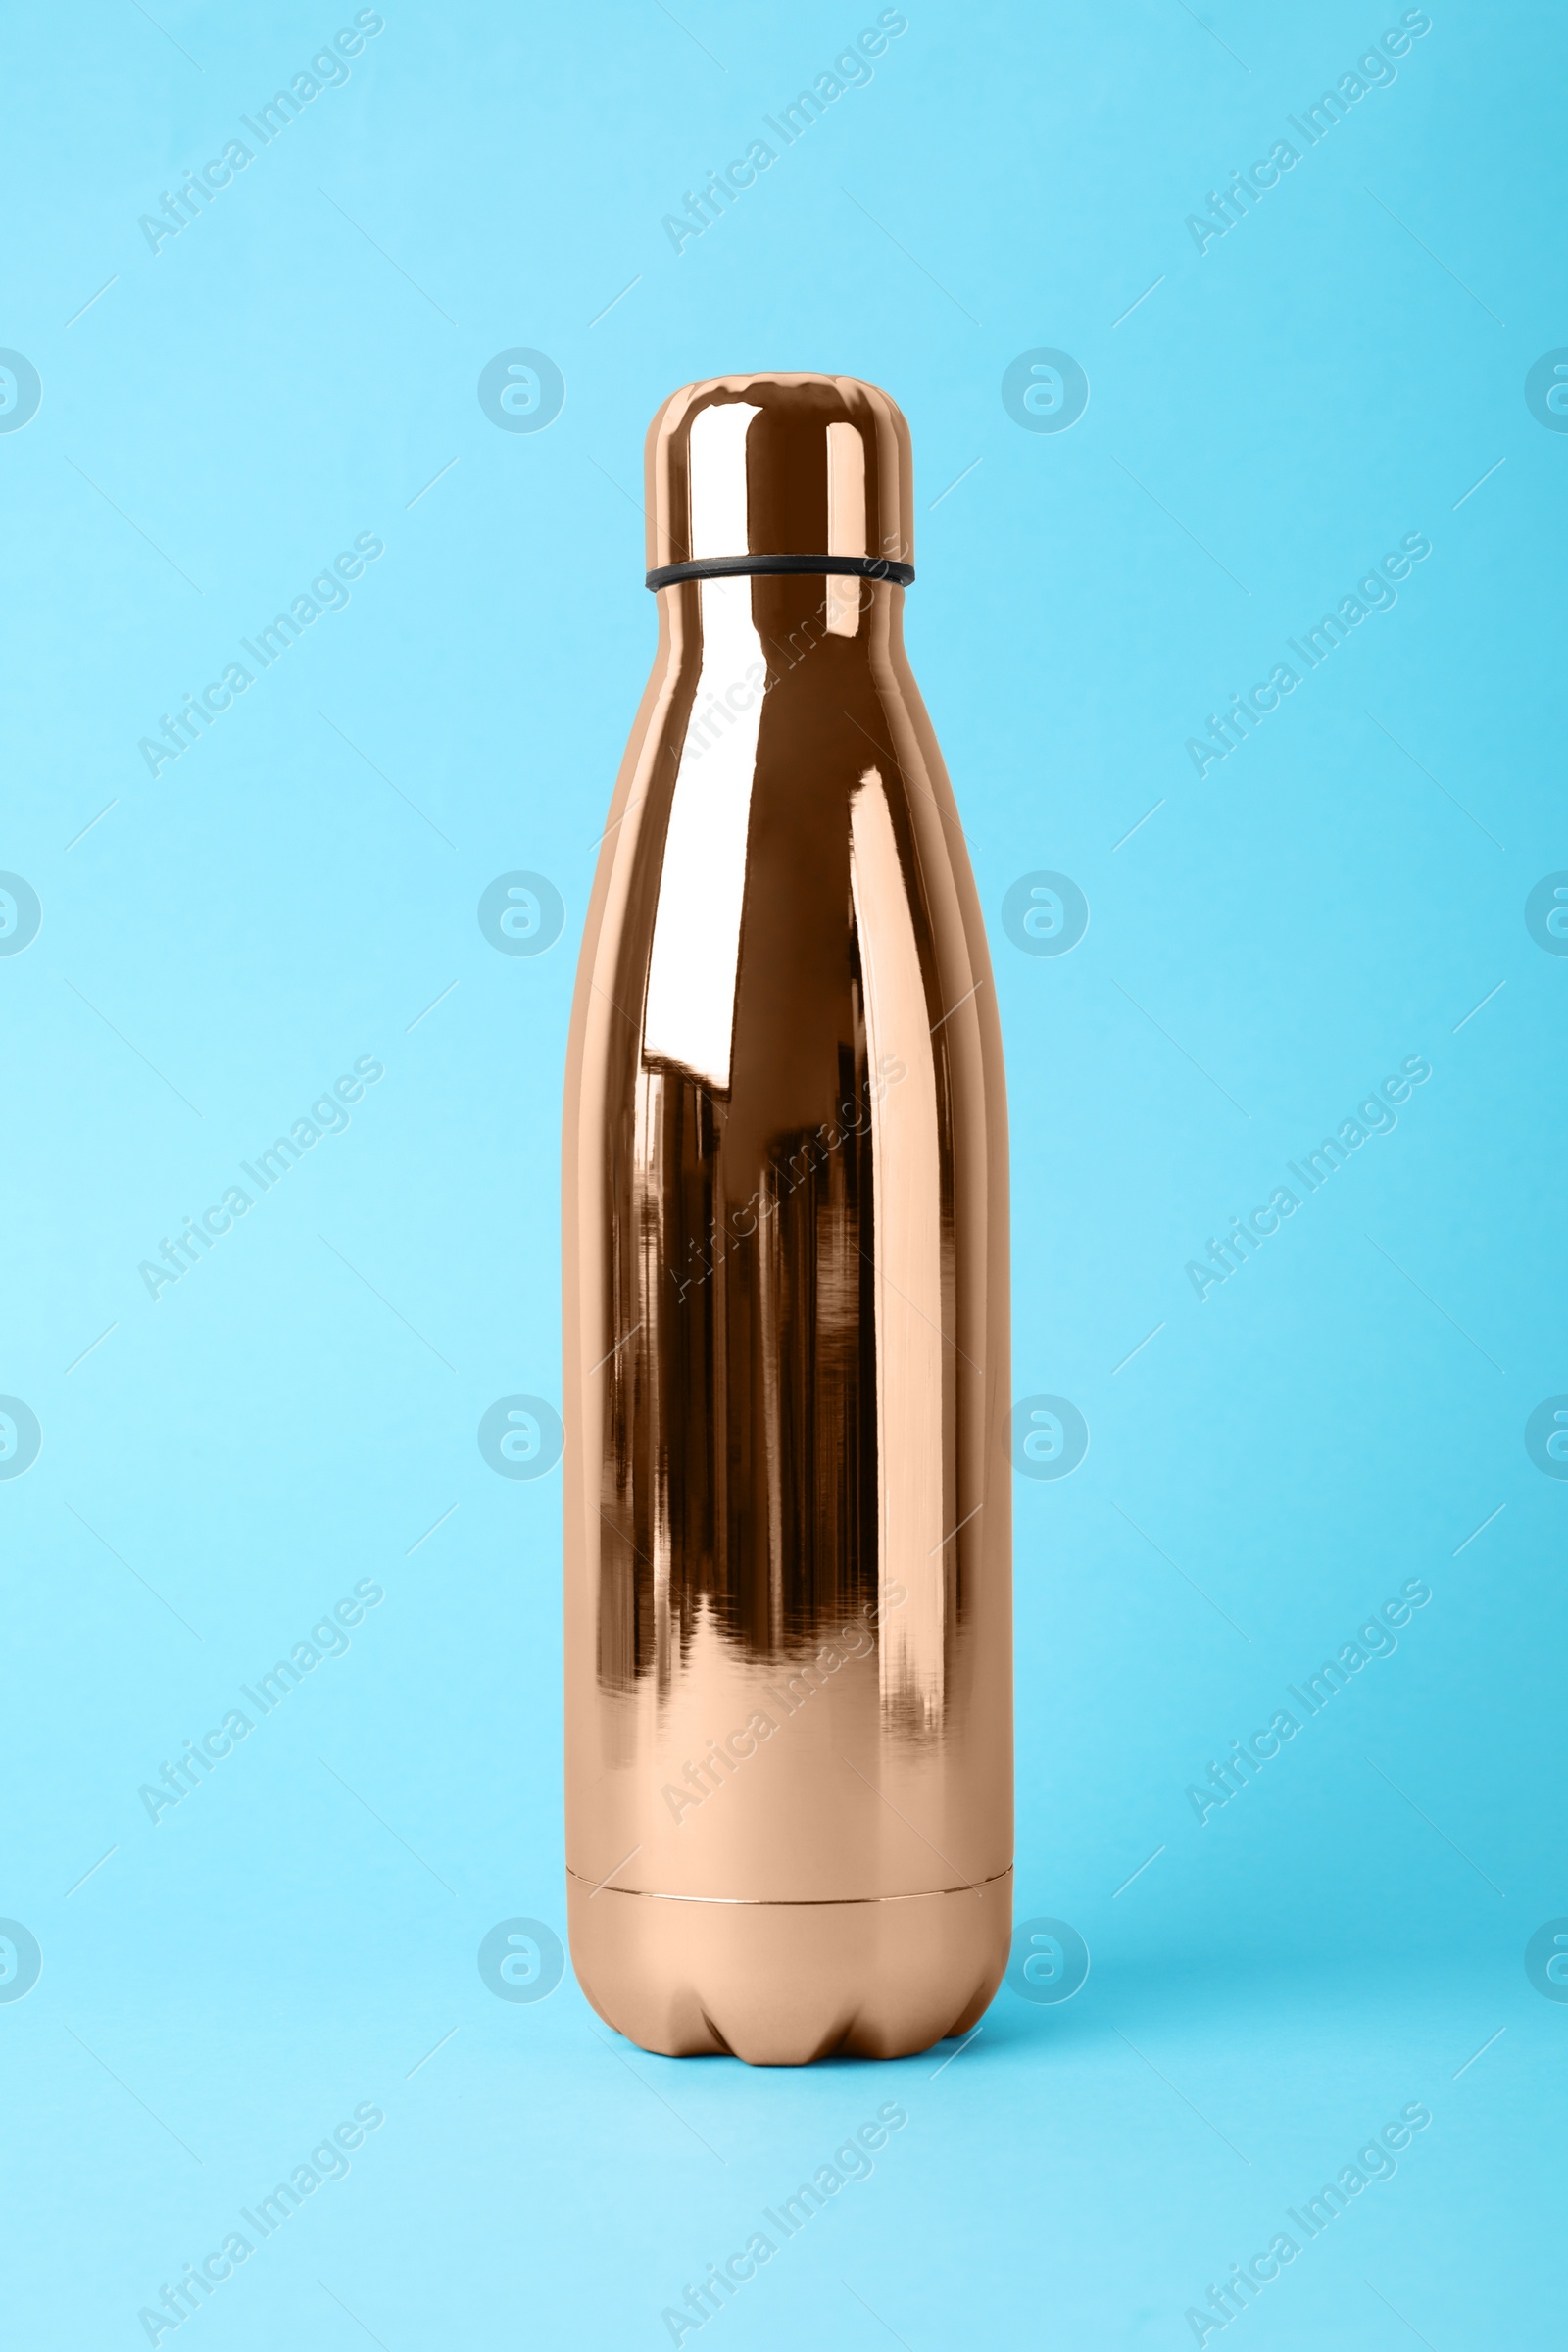 Photo of Metal bottle on light blue background. Conscious consumption